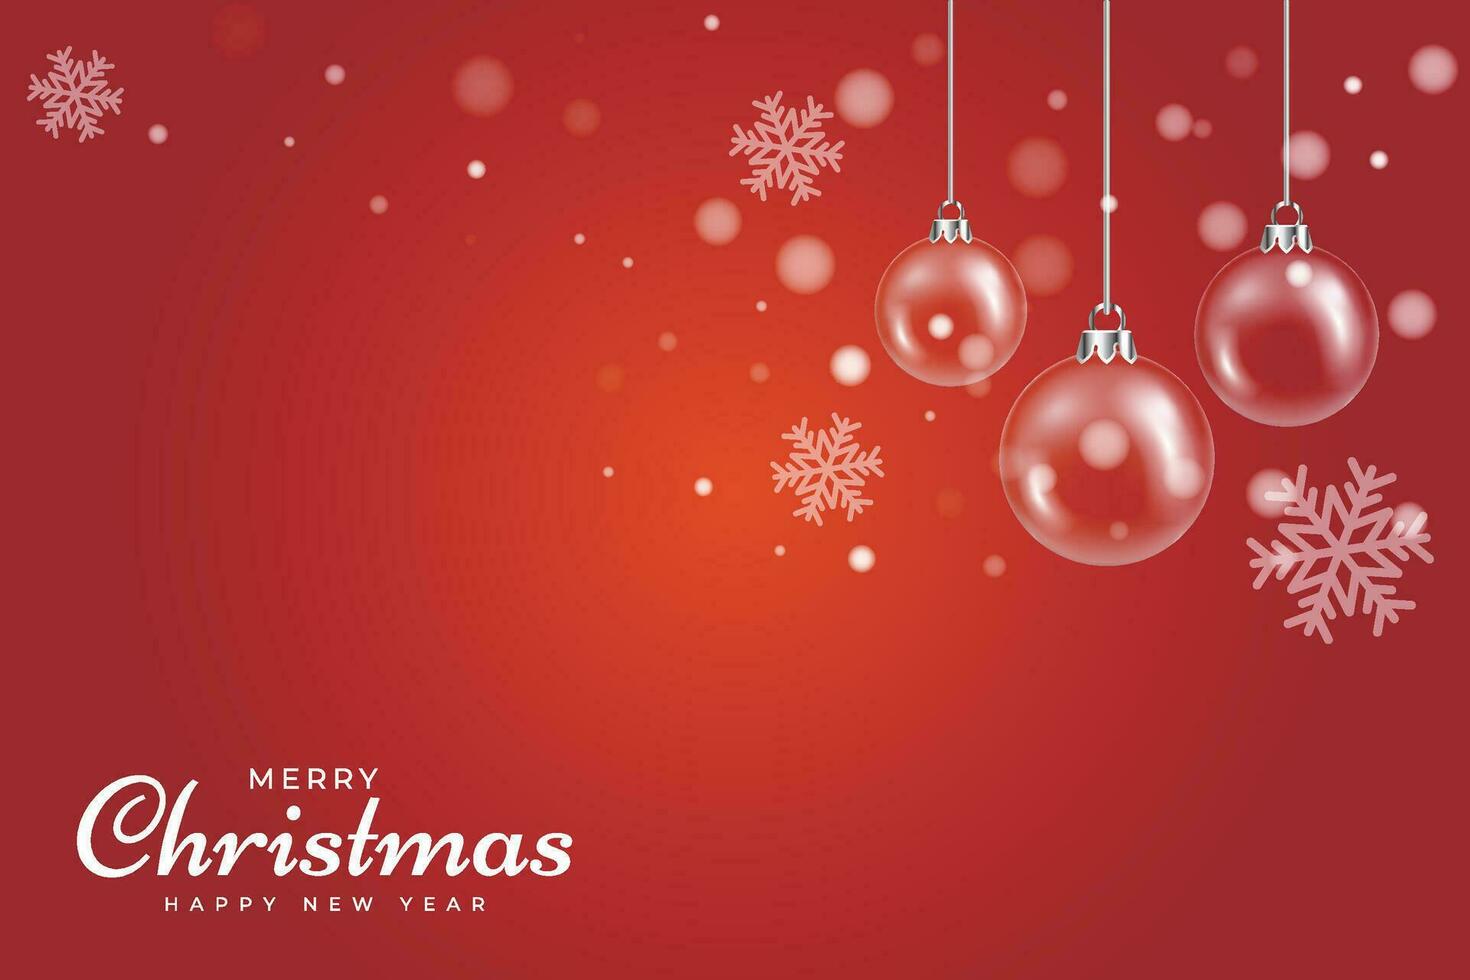 Merry Christmas background with Christmas pendants, gift boxes, hats vector collection